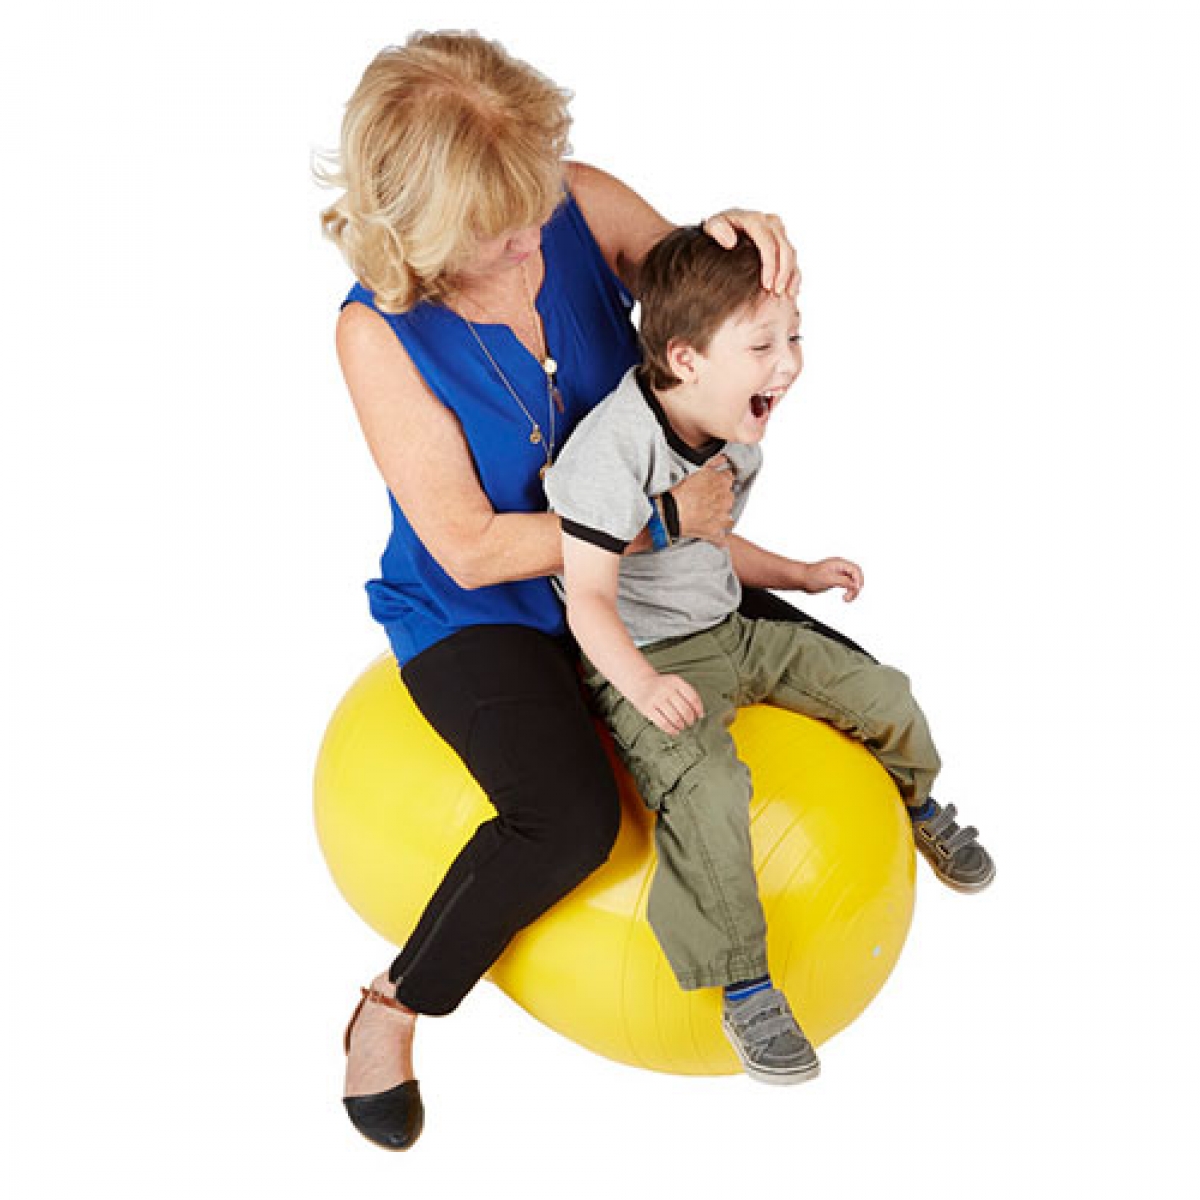 21.5 inches NRS Healthcare Inflatable Physio-Roll Diameter 55 cm 